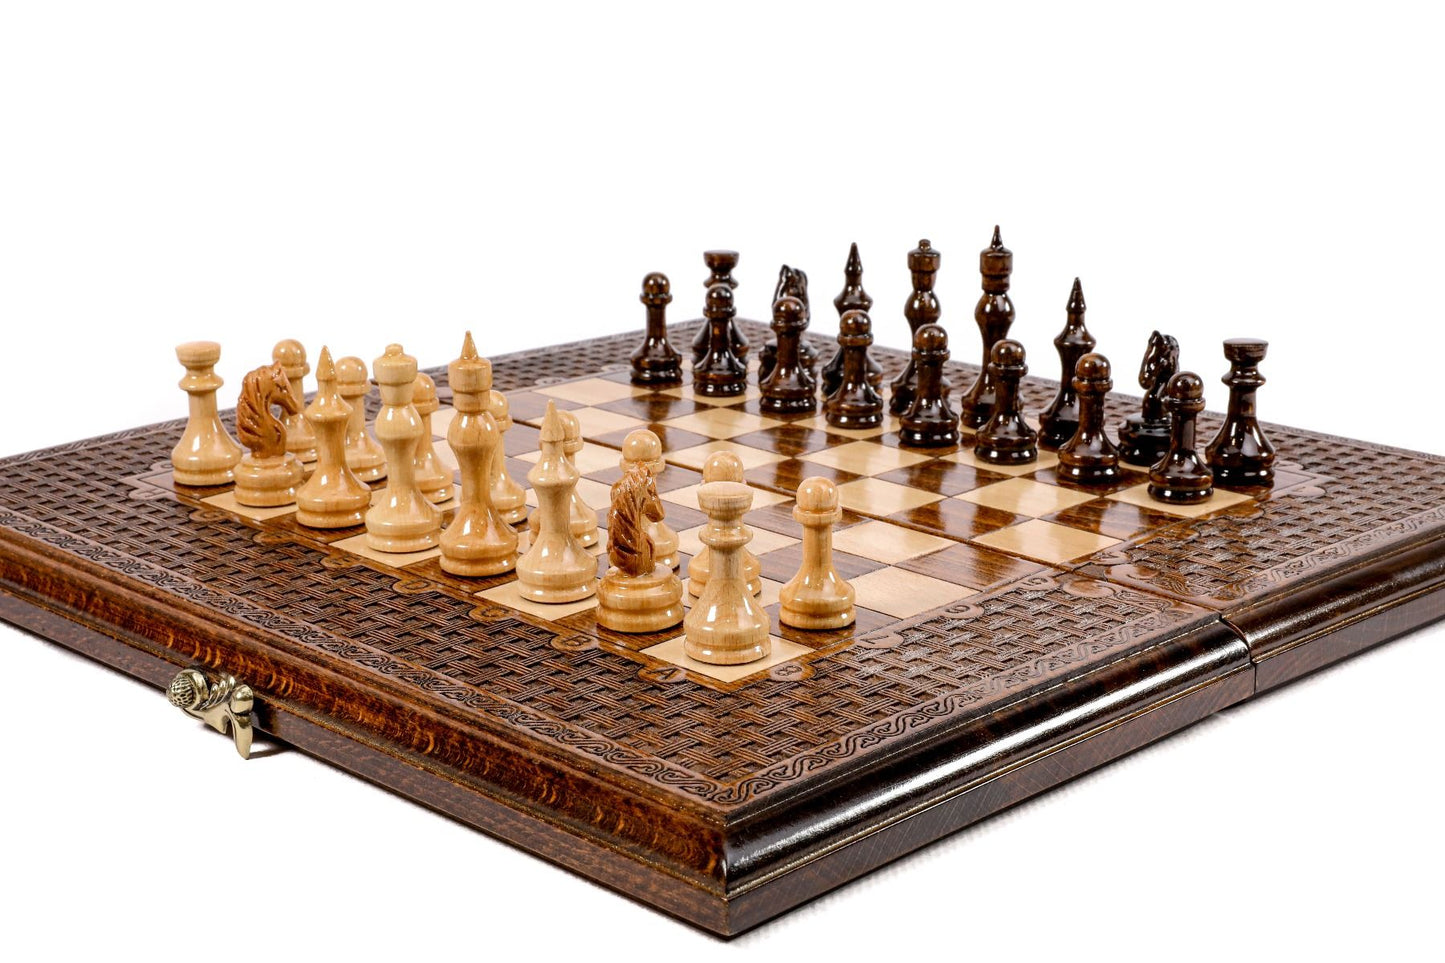 Dive into strategic gaming with a beautifully crafted set that combines chess and backgammon, handcrafted for a truly unique playing experience.